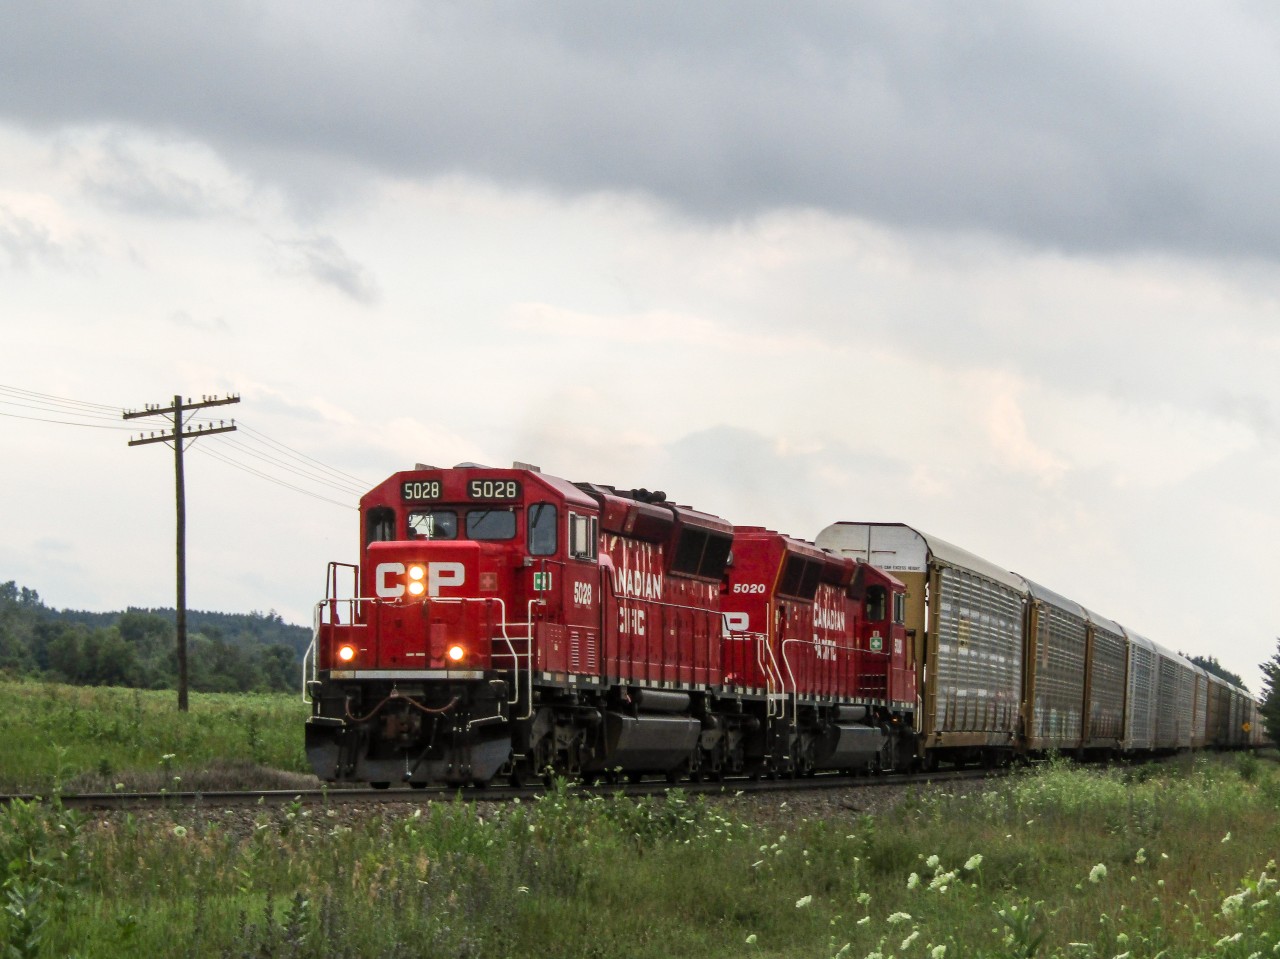 CP 2-240 speeds through Innerkip with a pair of SD30C-ECOs (CP 5028, CP 5020) pulling over 100 autoracks for Wolverton. Overtaking CP T79 in the Pender spur, 2-240 does close to track speed around the curve. 2-240 would end up dropping CP 5020 and 103 autoracks in Wolverton, before continuing to Toronto with 5028 and 5 autoracks. To cap it off, CP 5028 has a fouled K3HL, making for an interesting horn disturbing a quiet Tuesday evening in Innerkip.